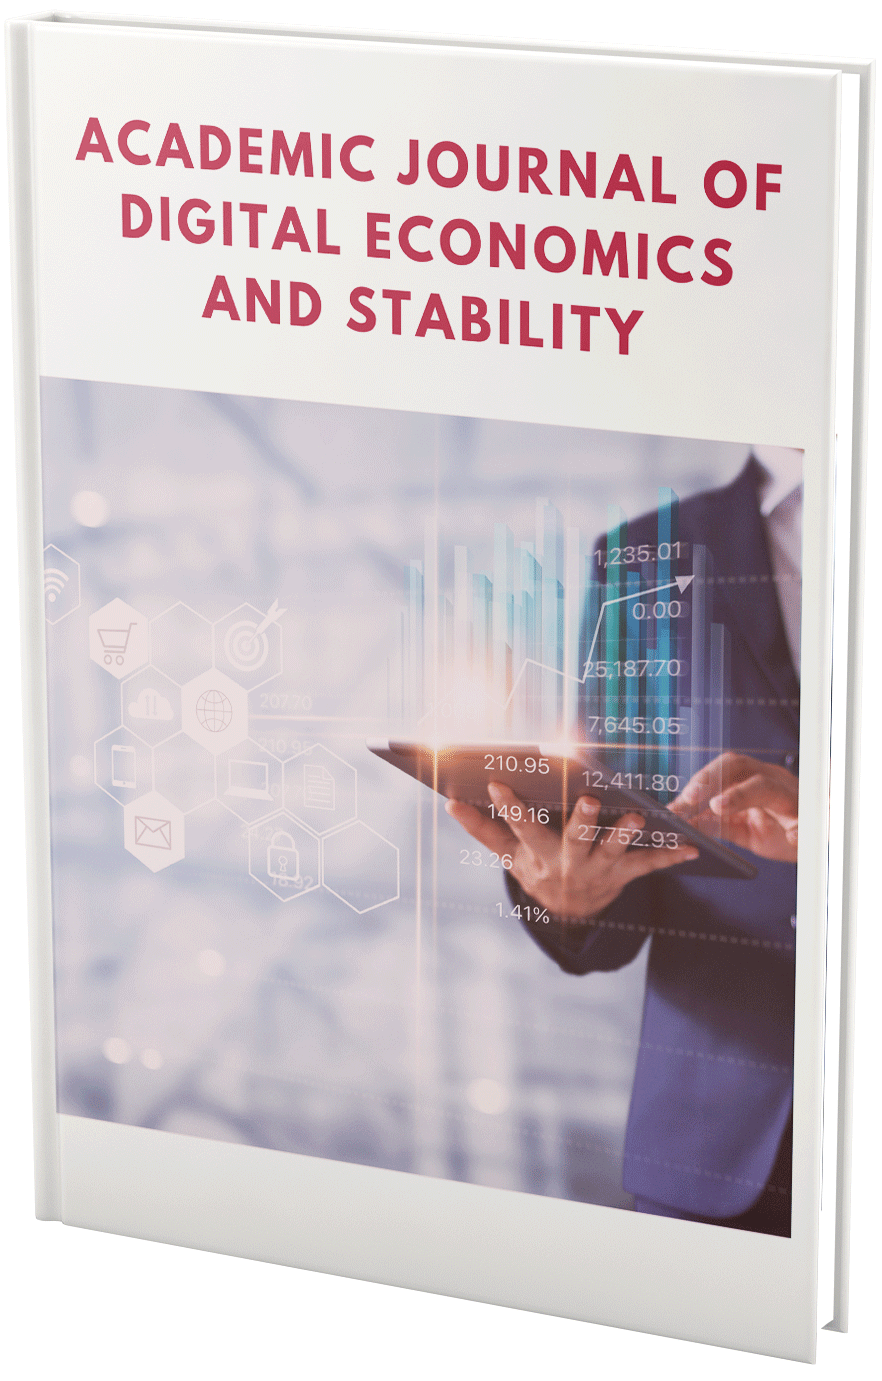 					View Vol. 7 (2021): Academic Journal of Digital Economics and Stability (Spain)
				